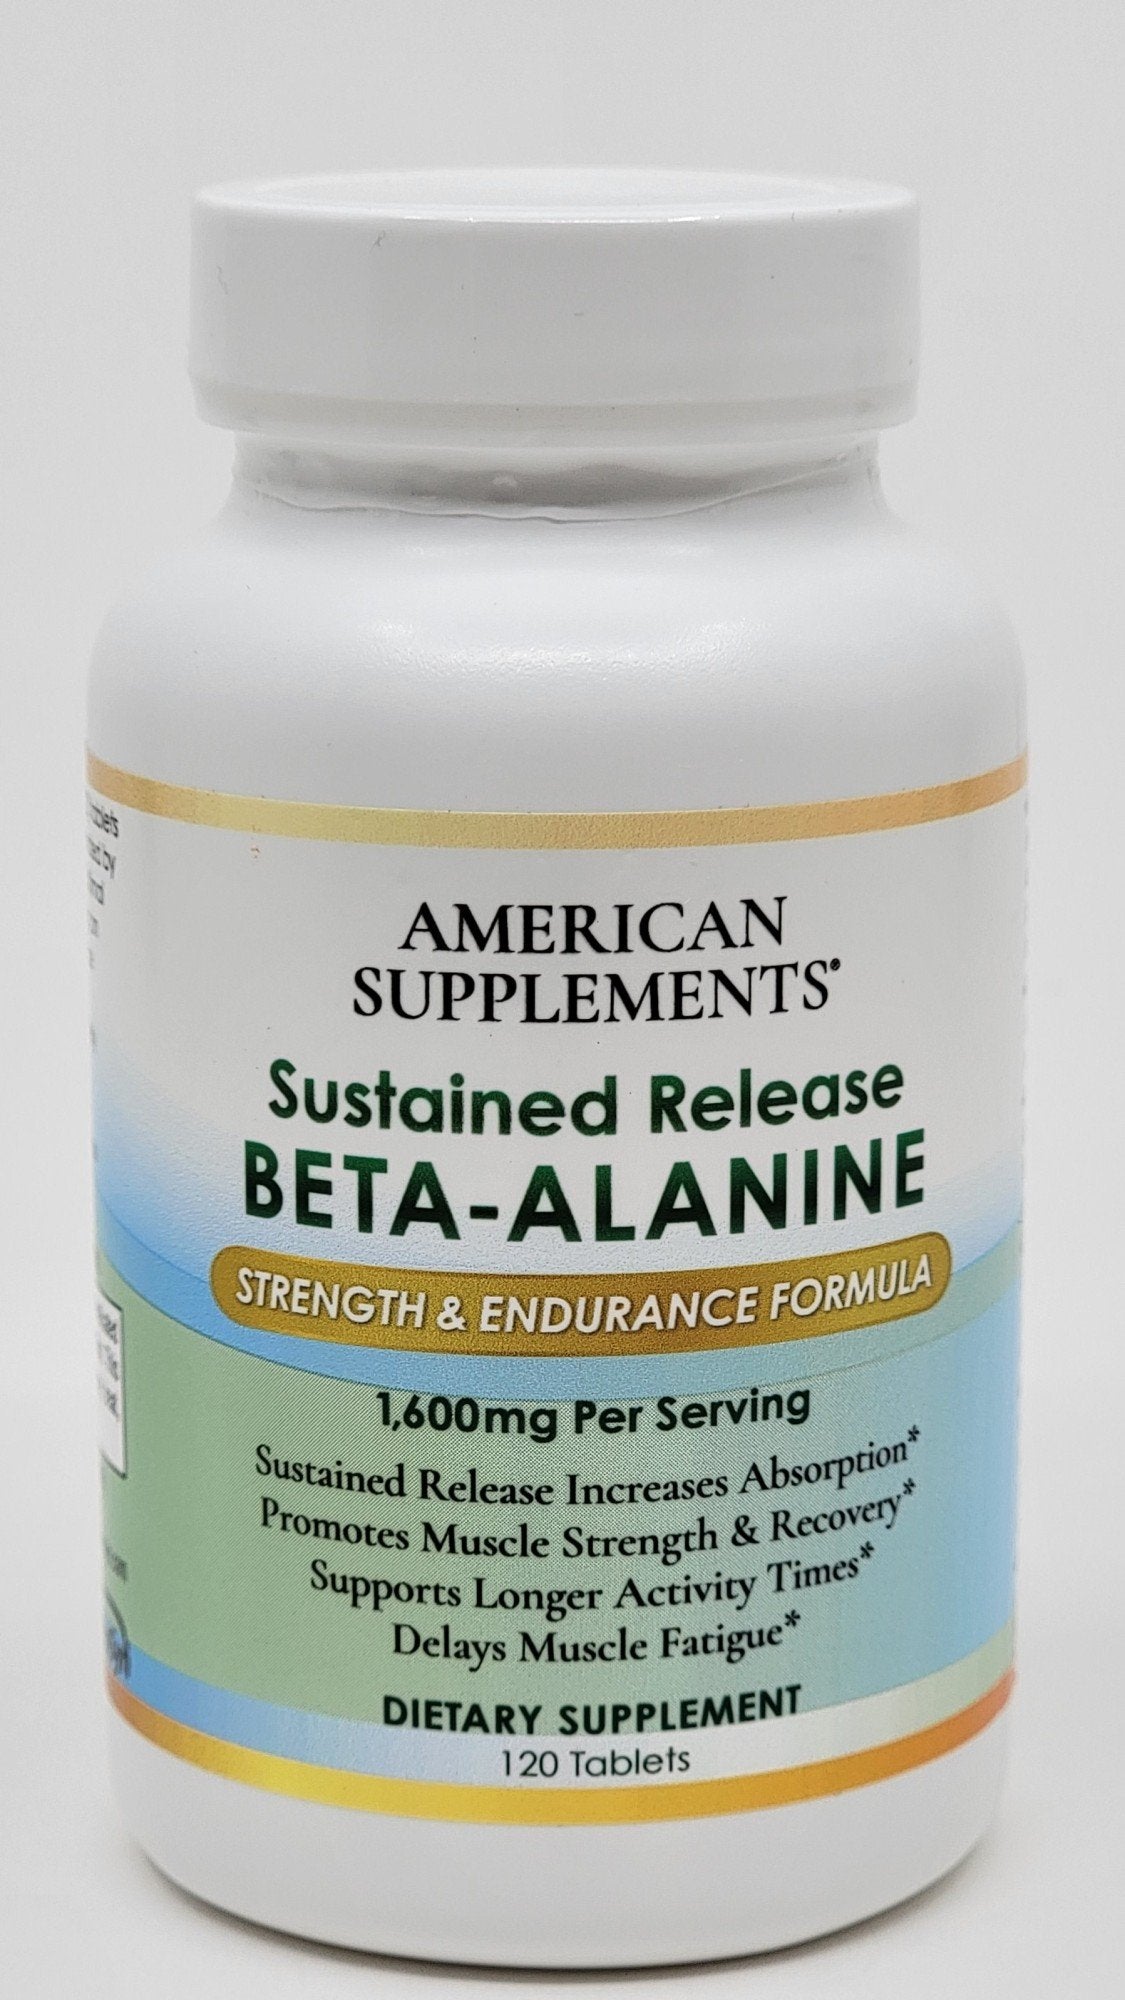 American Supplements Sustained Release Beta-Alanine-Strength &amp; Endurance Formula-1,600 mg 120 Tablet